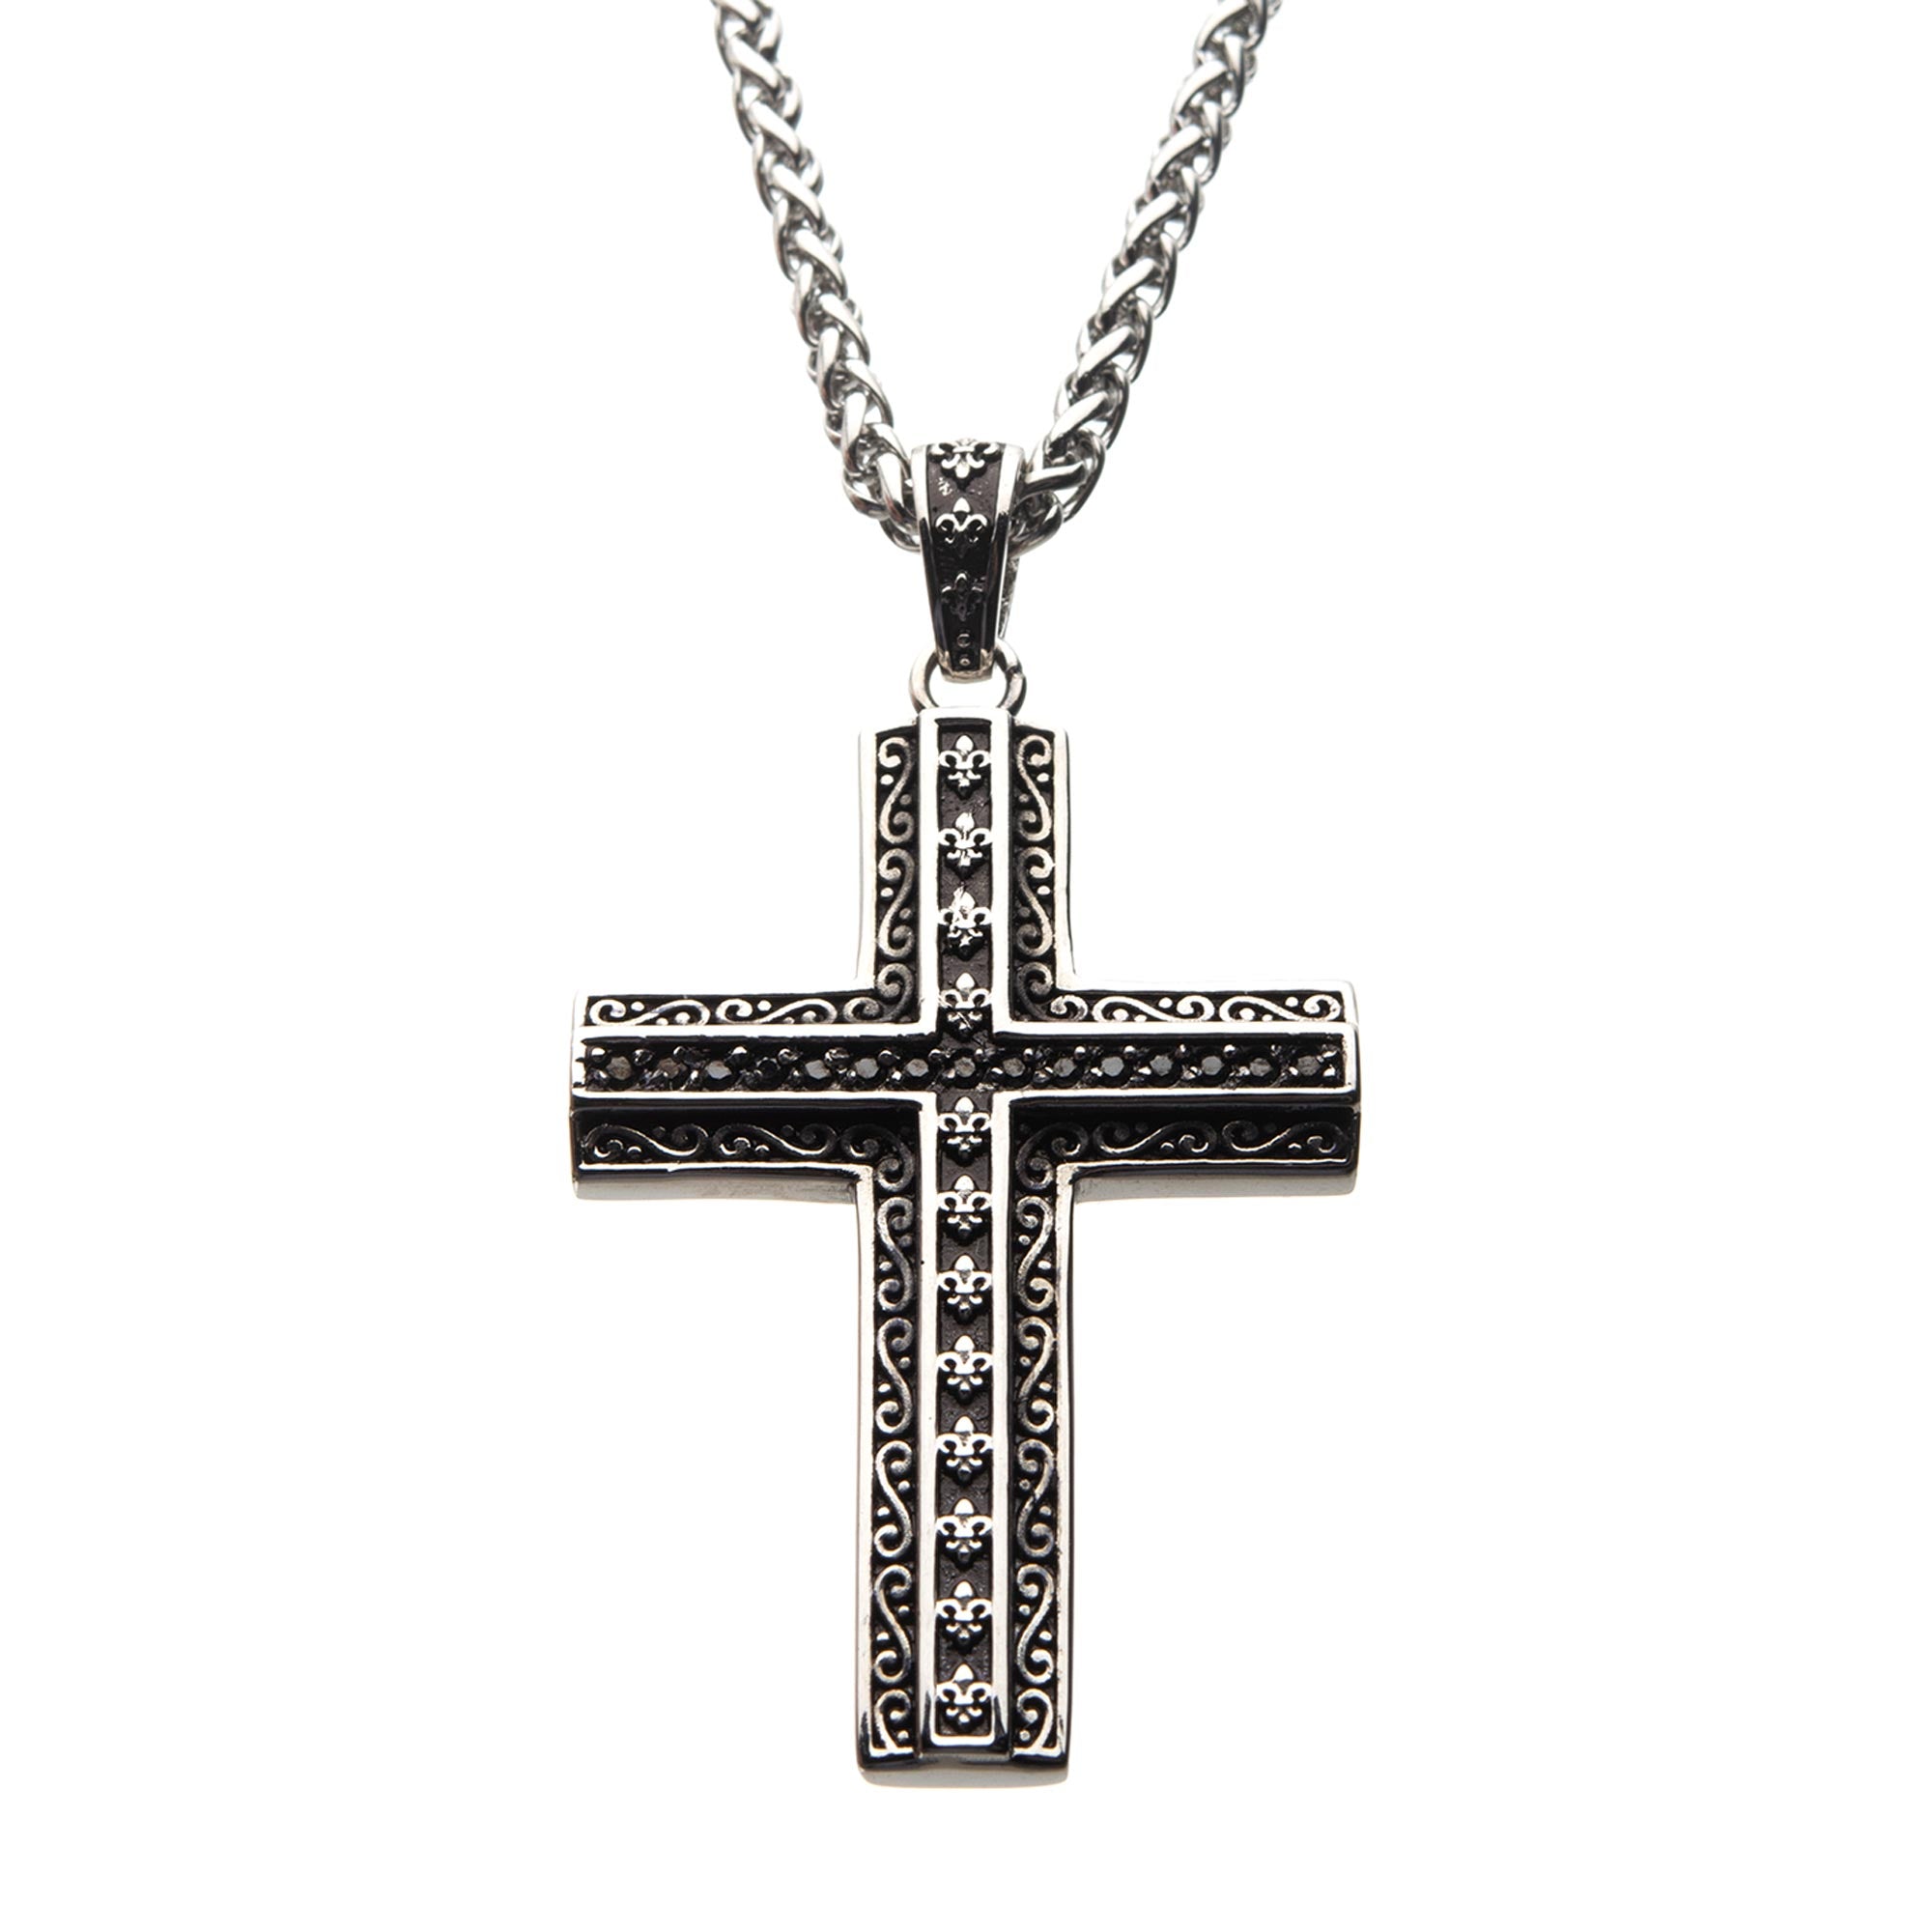 Black Oxidized Steel Cross with Black CZs Pendant with Steel Wheat Chain